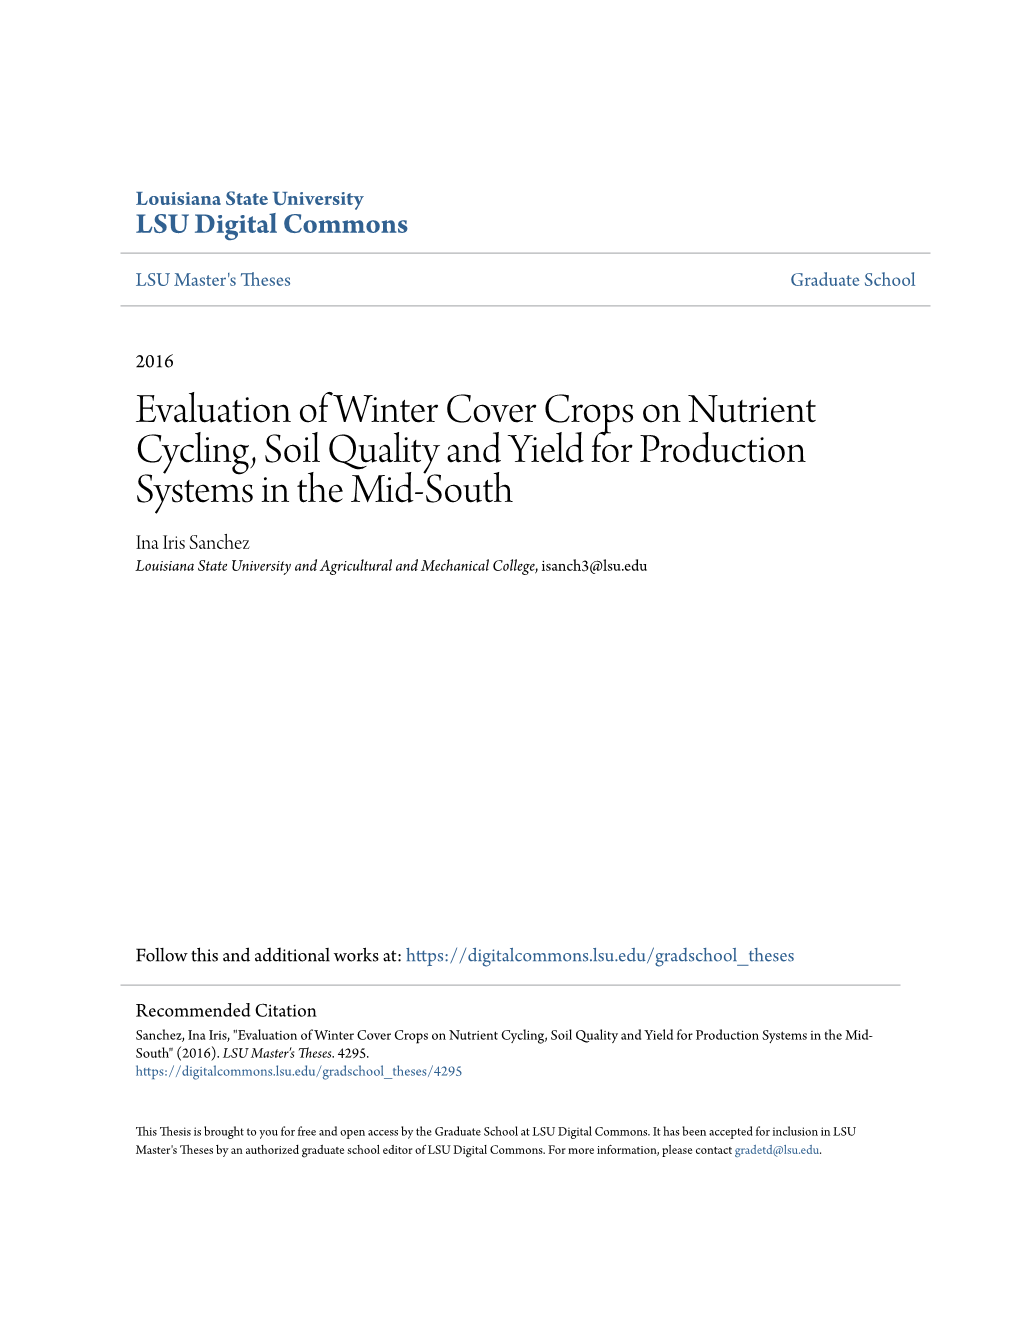 Evaluation of Winter Cover Crops on Nutrient Cycling, Soil Quality And